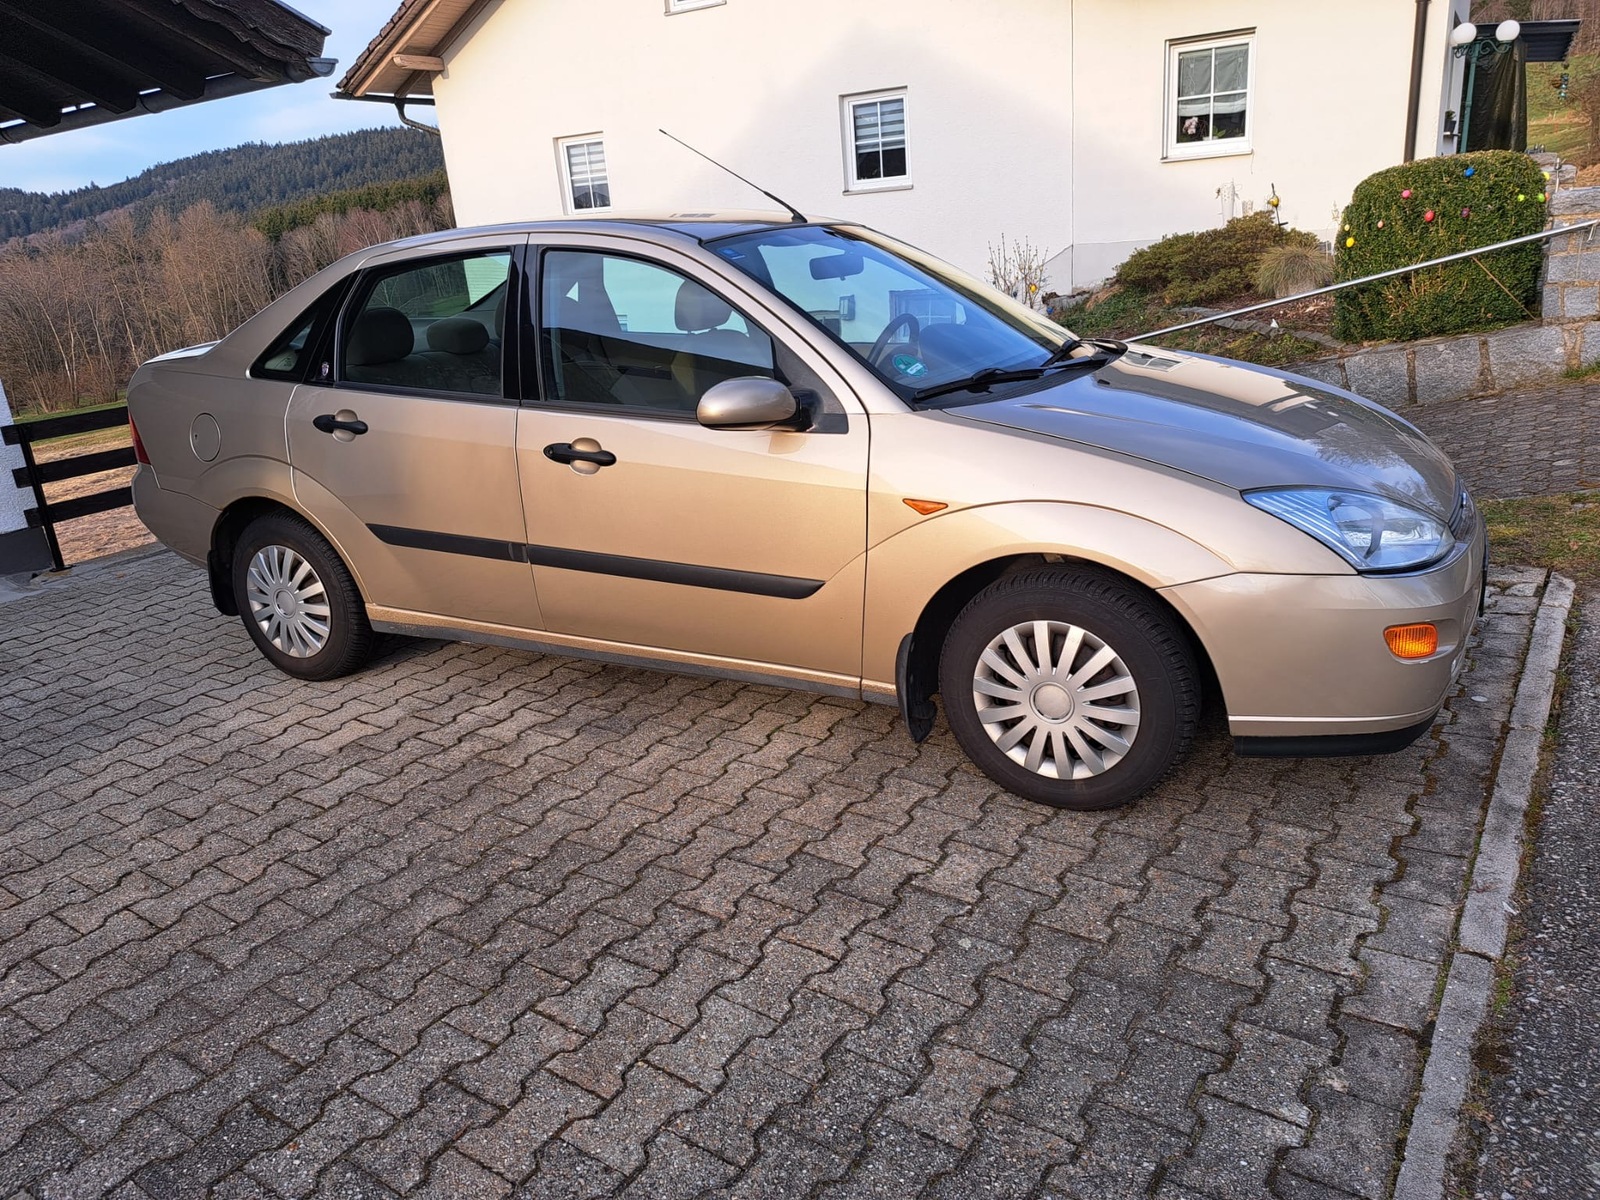 Gold 1999 Ford Focus Saloon 1.6   101hp